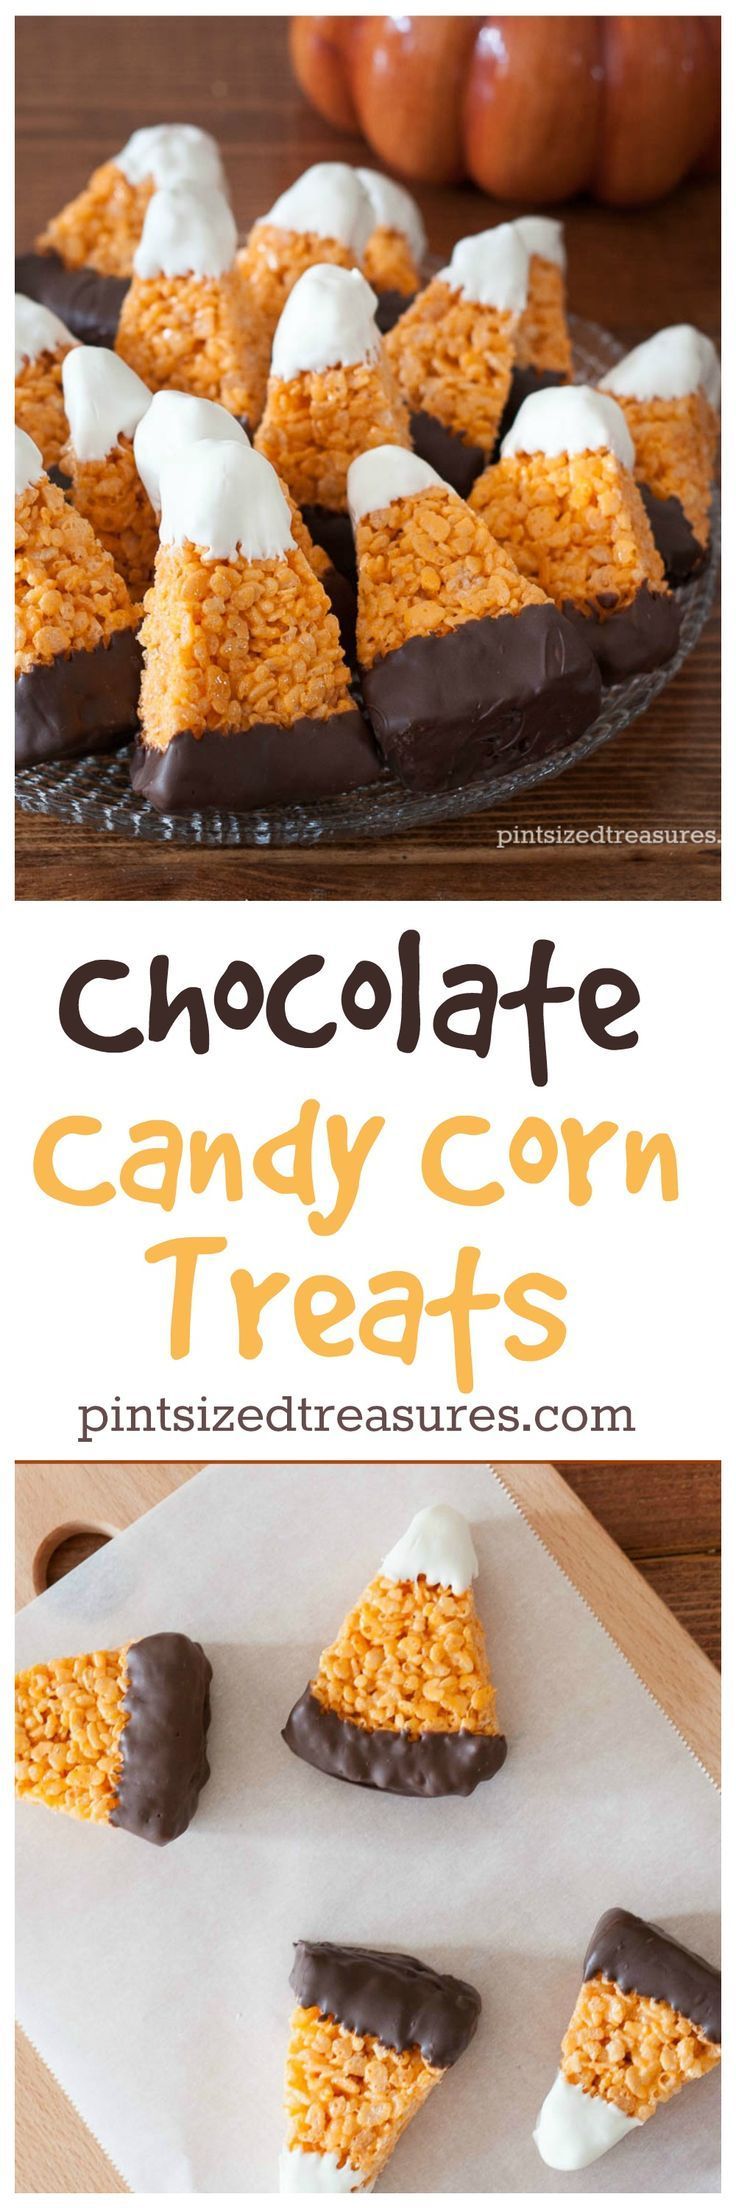 Chocolate Candy Corn Crispy Treats are super-cute and easy to make! Not to mention